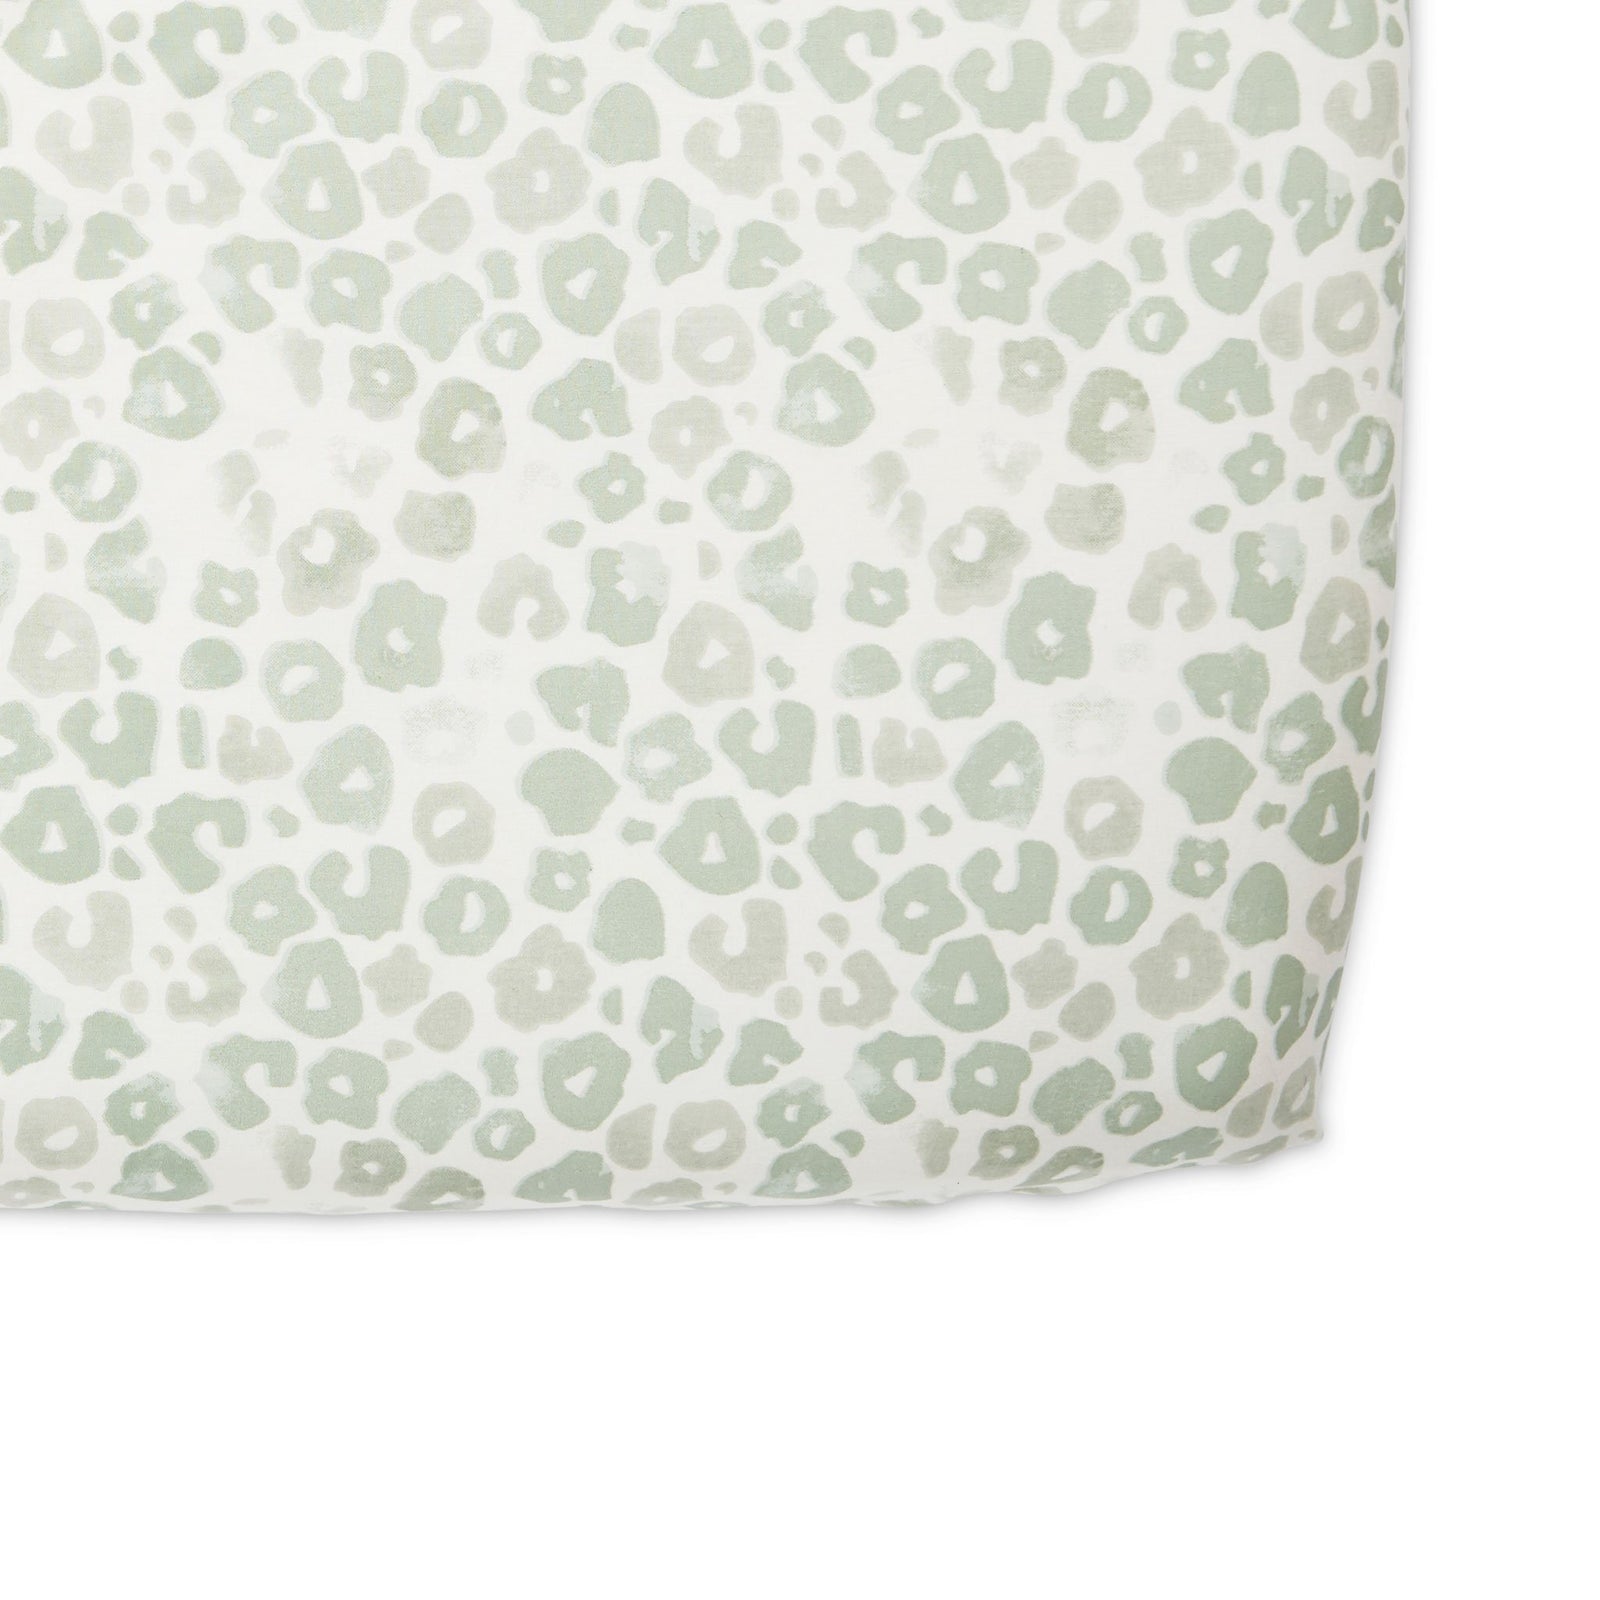 Pehr Poppy Celadon Organic Crib Sheet. GOTS Certified Organic Cotton. Screen printed by hand using AZO-Free dyes. White with blue poppies.